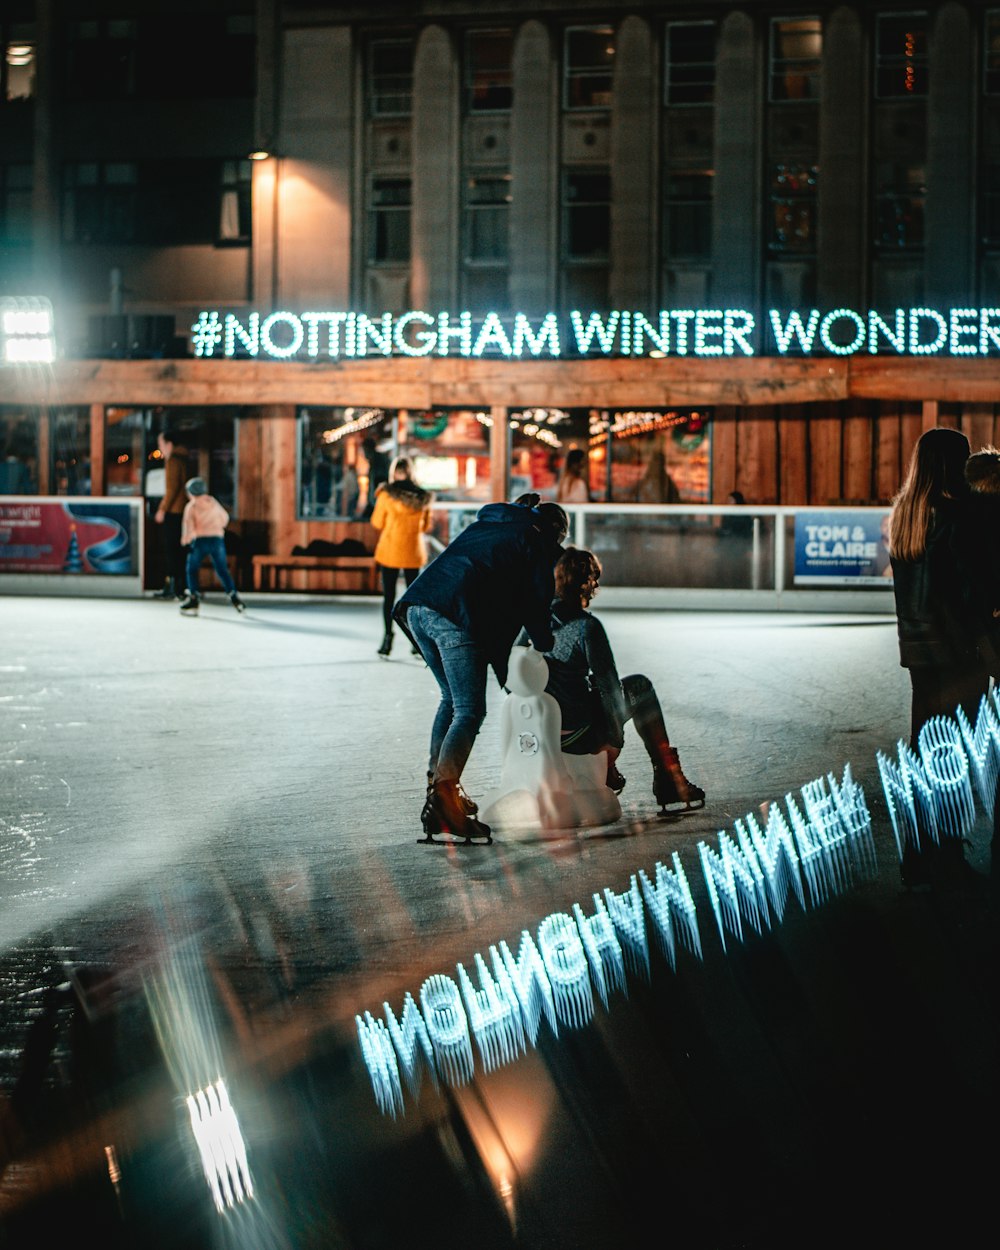 person sitting on white chair and another person standing viewing Nottingham Winter Wonderland building during night time